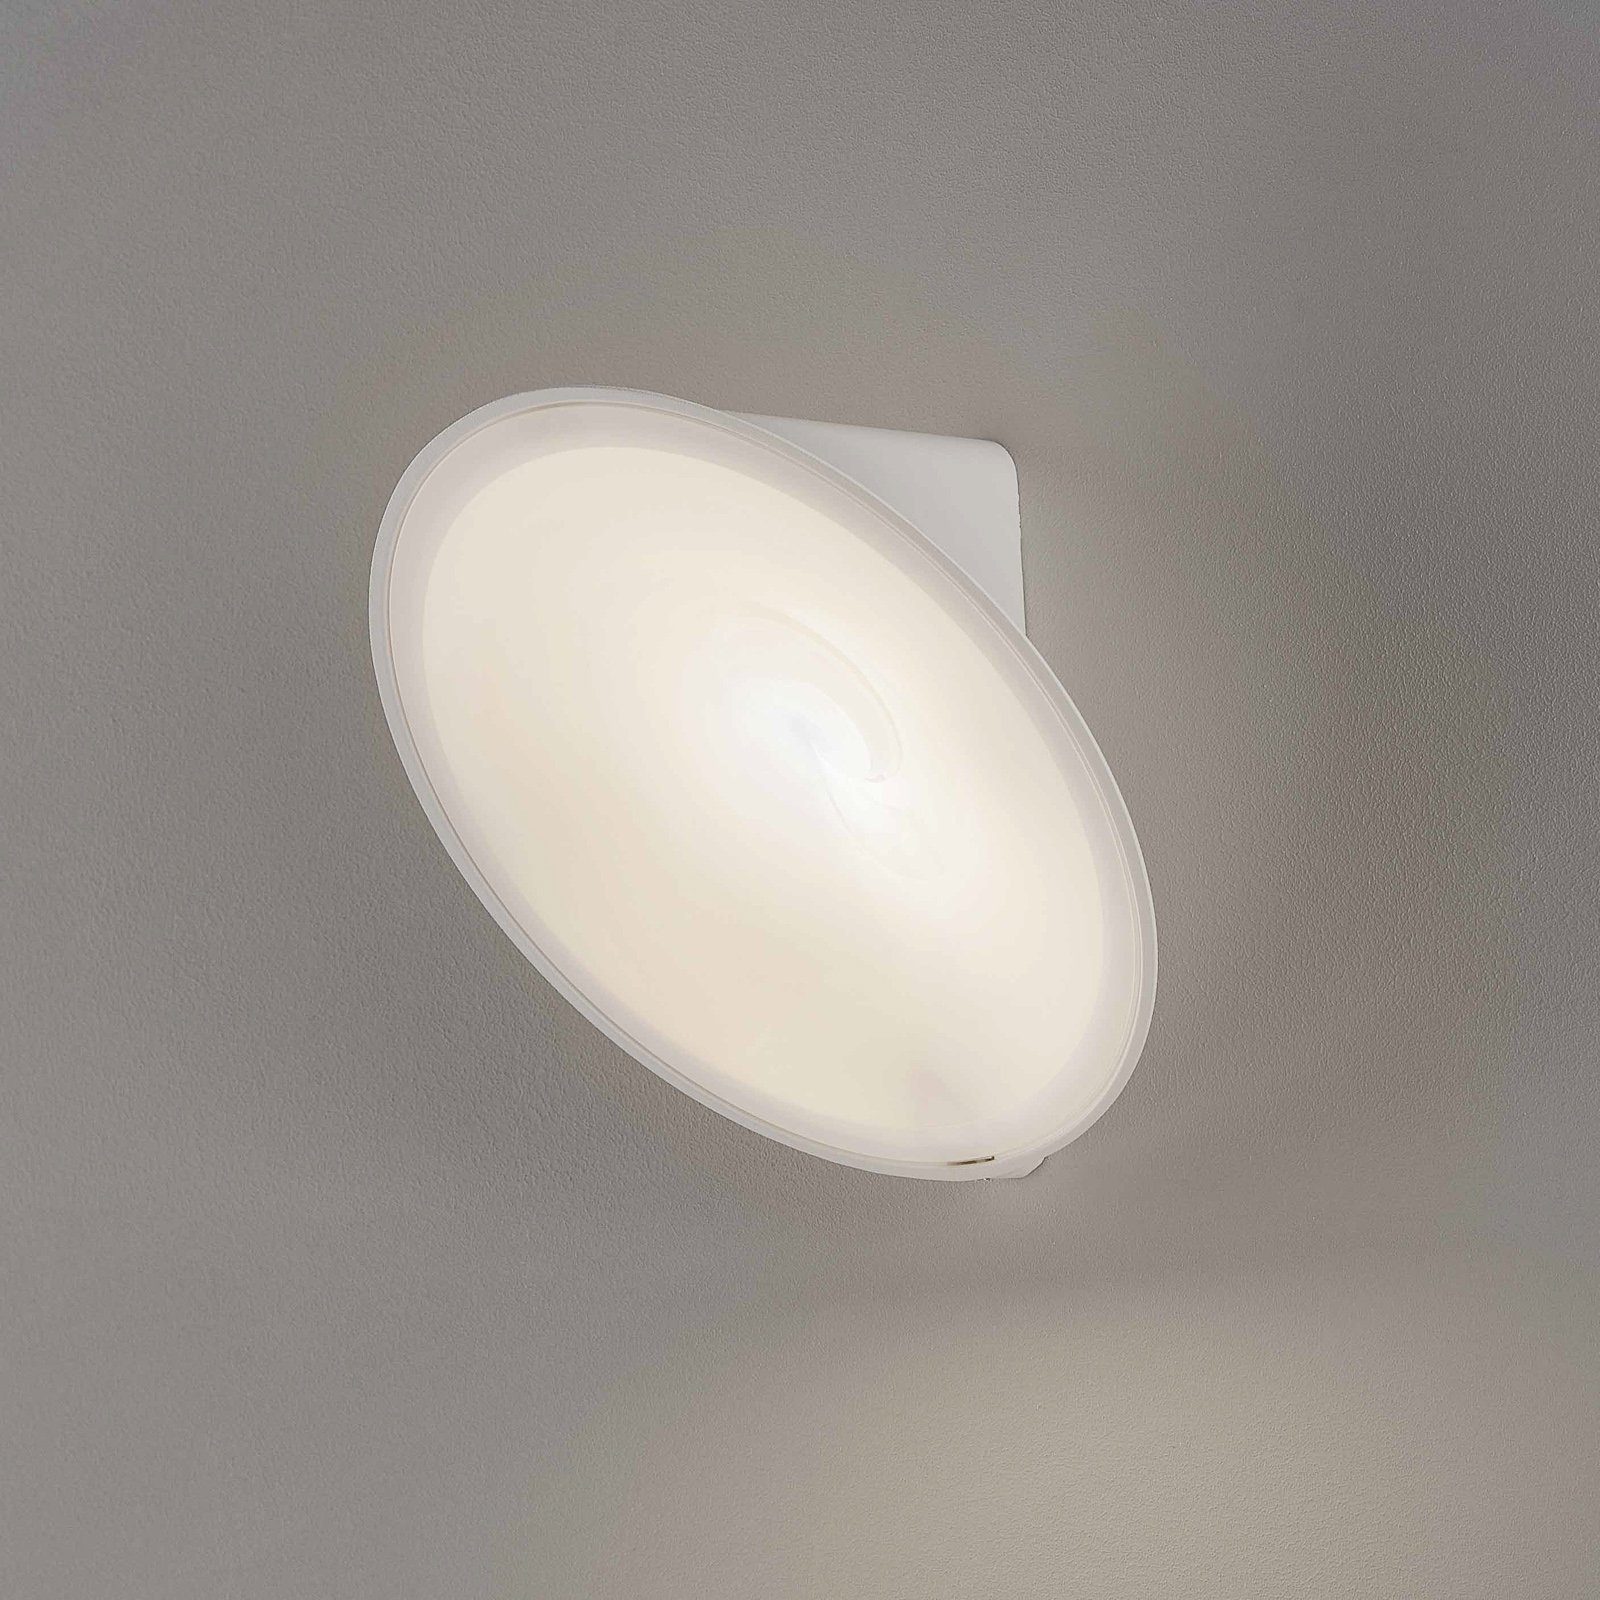 Axolight Orchid LED wall light, white